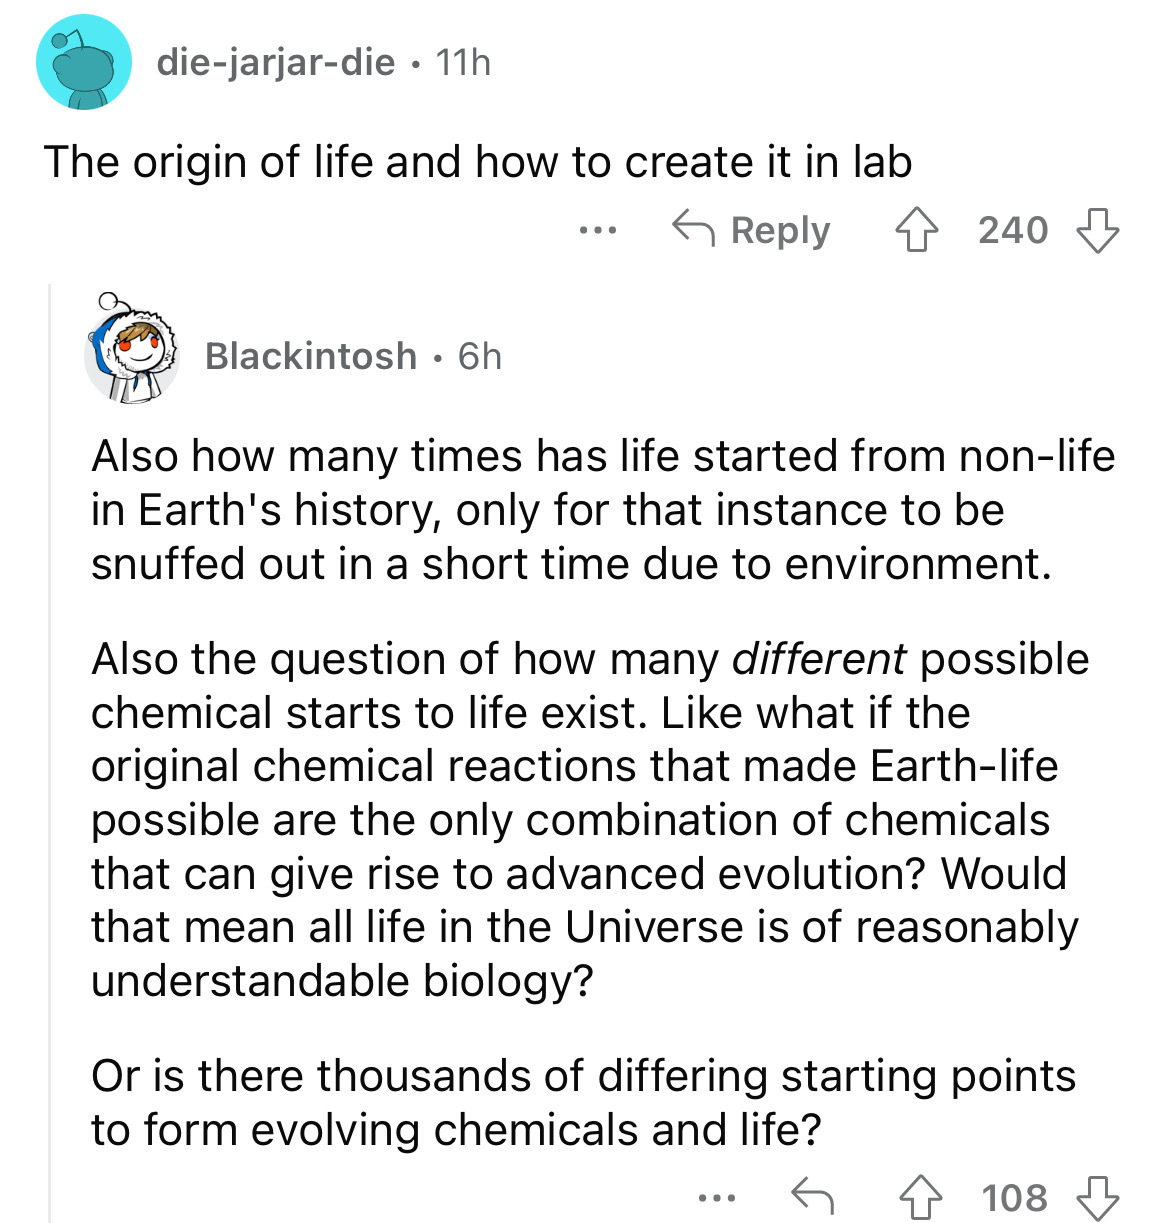 angle - diejarjardie 11h The origin of life and how to create it in lab Blackintosh 6h ... 240 Also how many times has life started from nonlife in Earth's history, only for that instance to be snuffed out in a short time due to environment. Also the ques